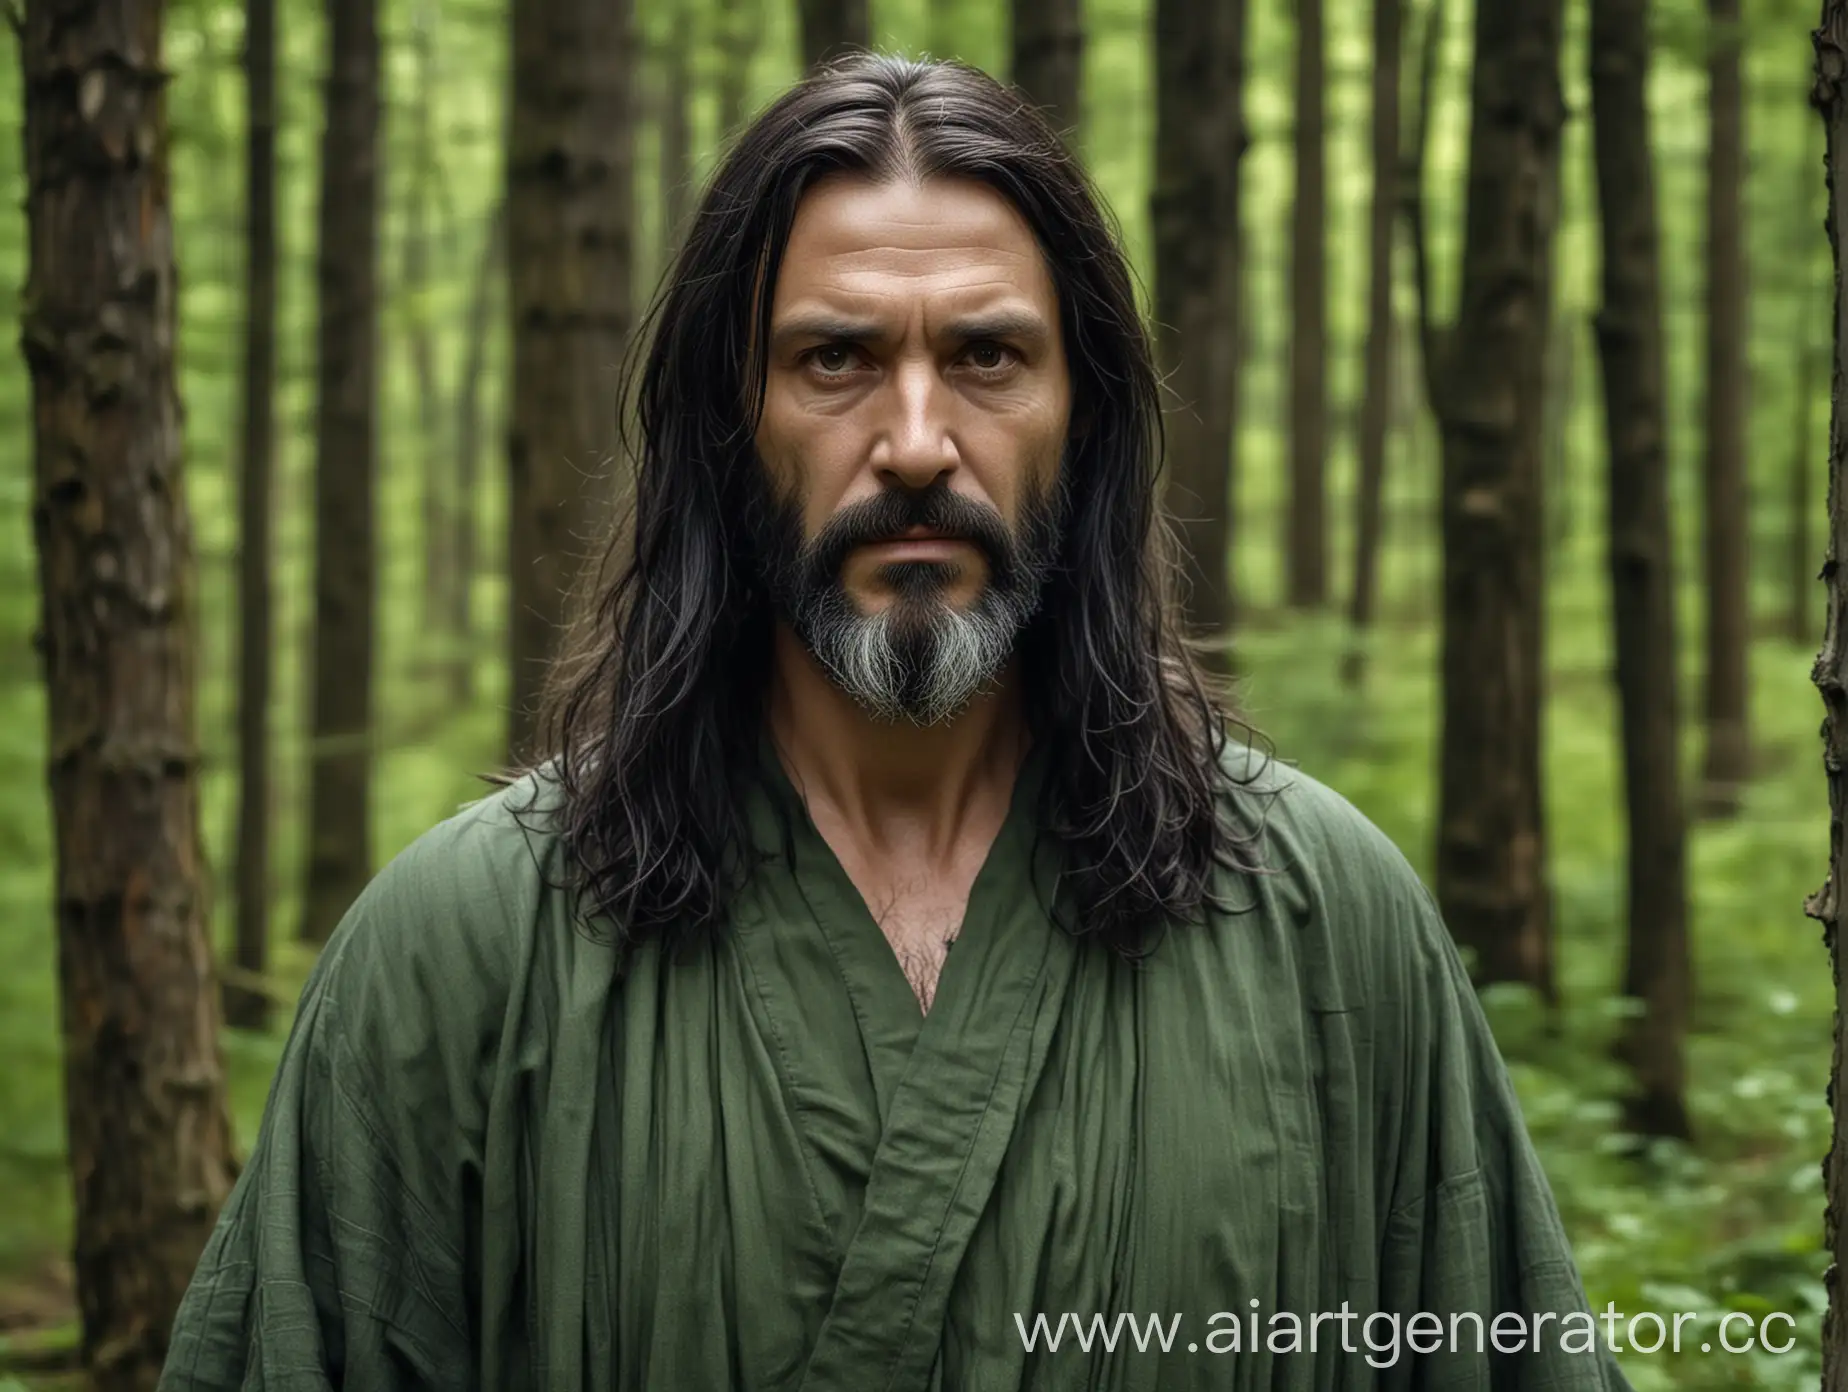 Sturdy-Middleaged-Man-with-Long-Dark-Hair-in-Druid-Robe-Against-Green-Forest